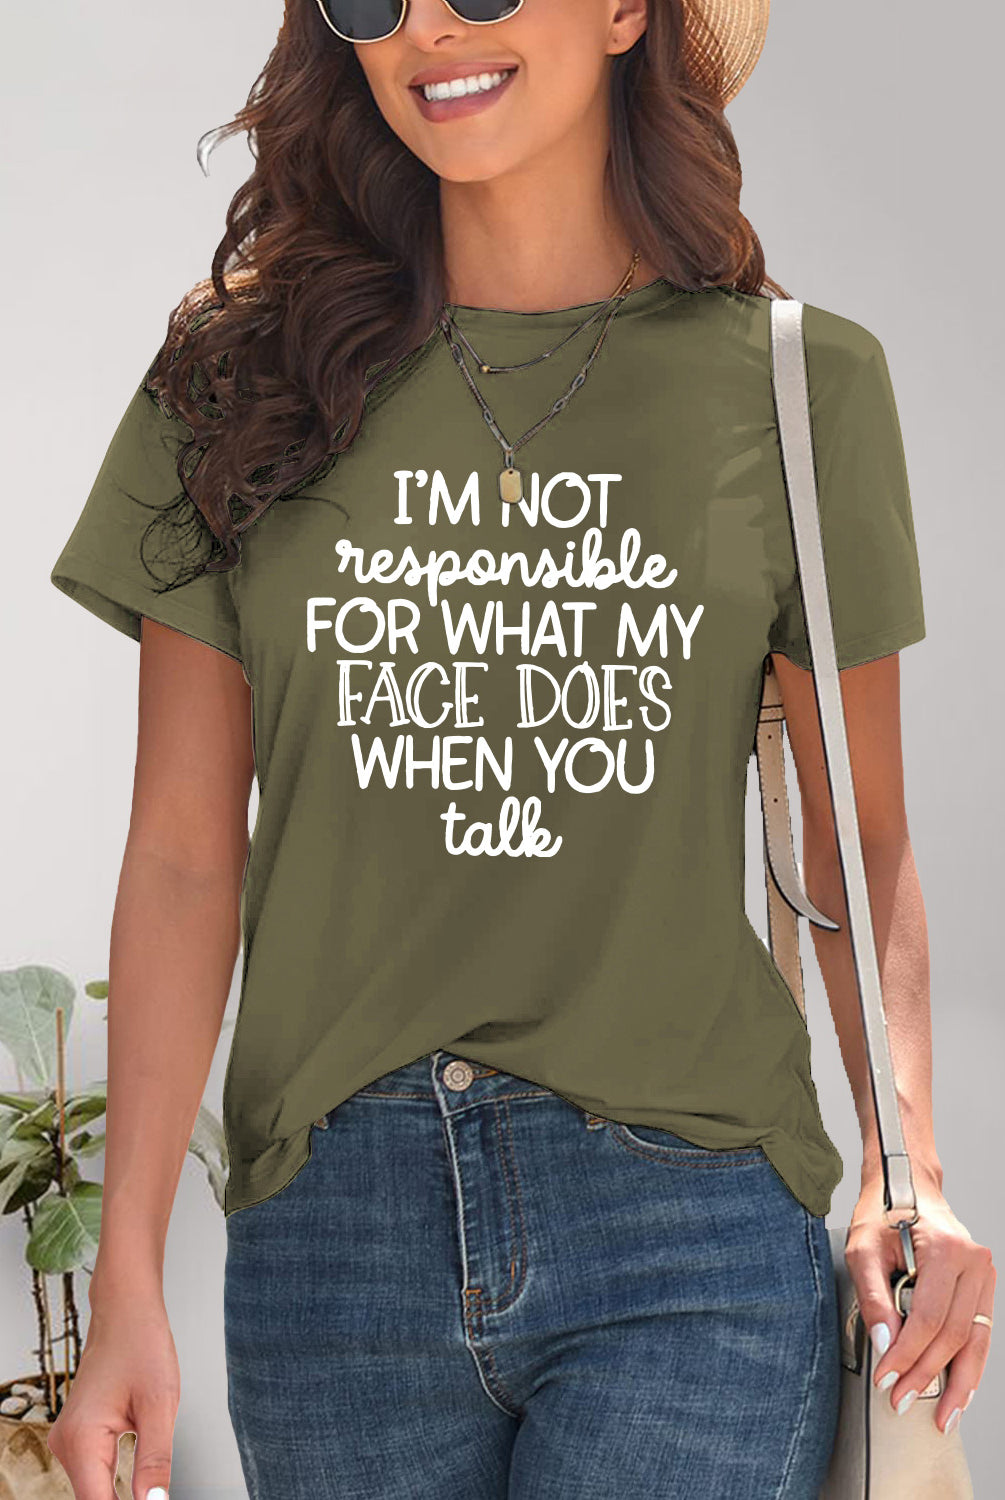  Woman smiling in a green graphic t-shirt with a humorous quote, epitomizing casual cool.